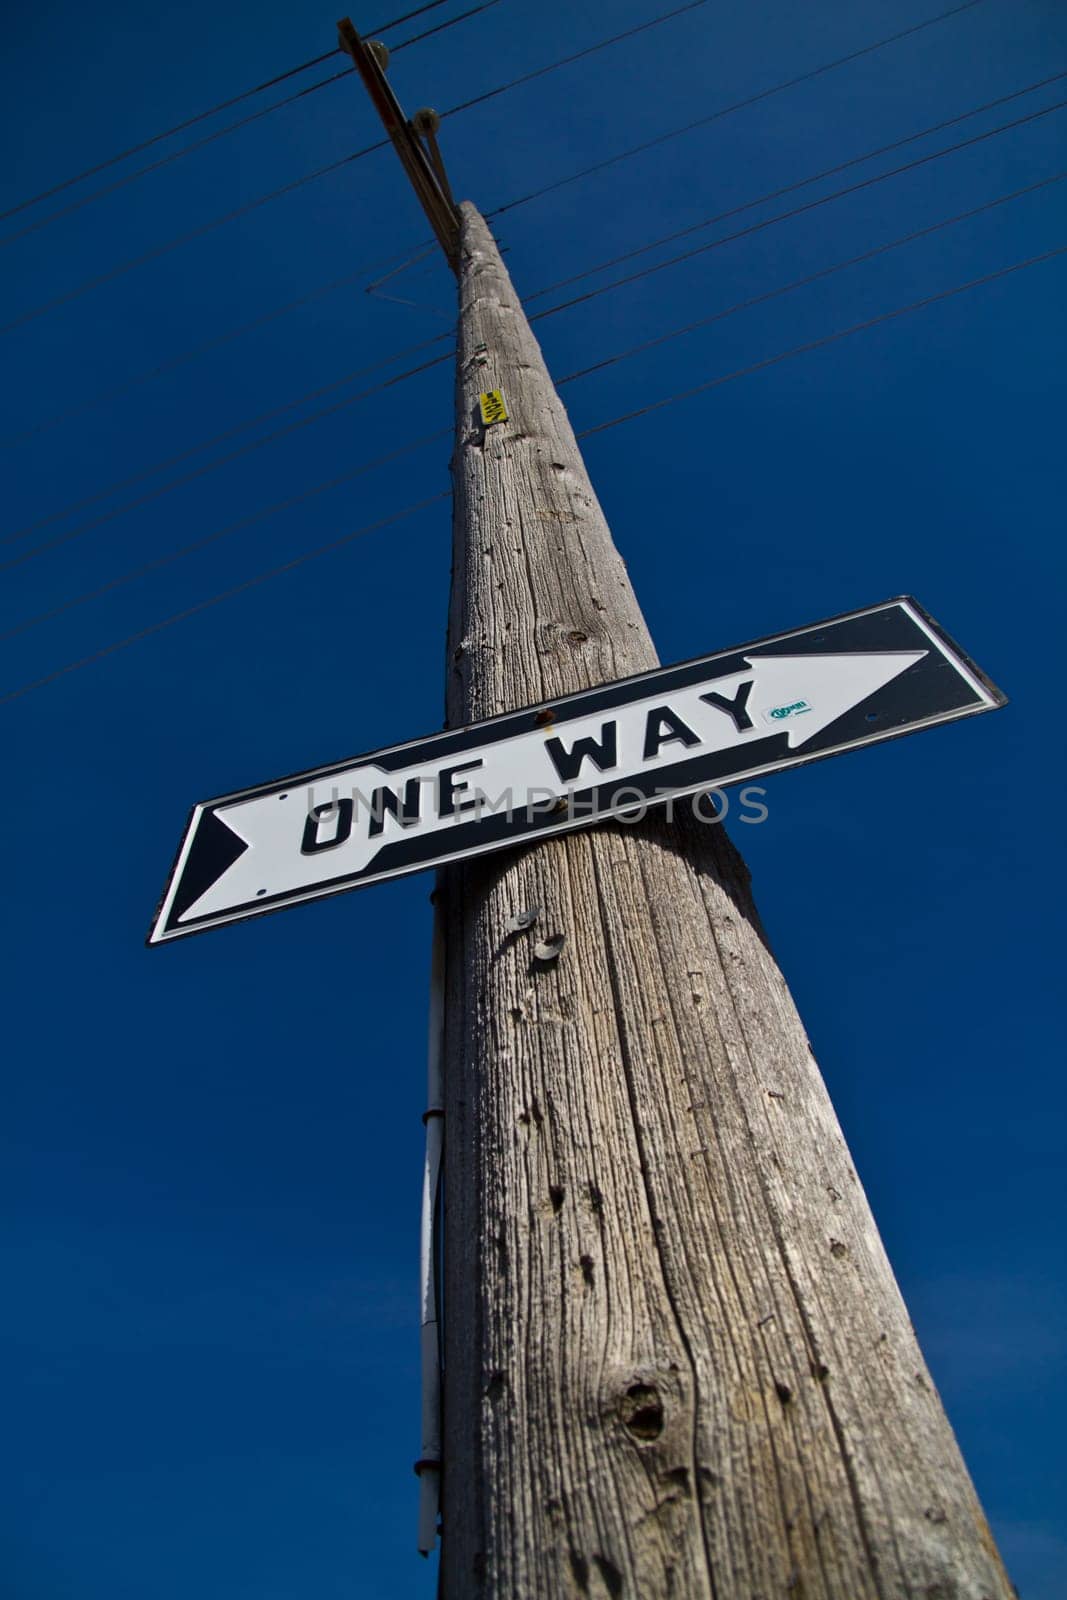 Clear Direction: A weathered utility pole in Allegan, Michigan proudly displays a 'ONE WAY' sign, pointing left against a vast blue sky, symbolizing certainty, decision-making, and a singular path forward.